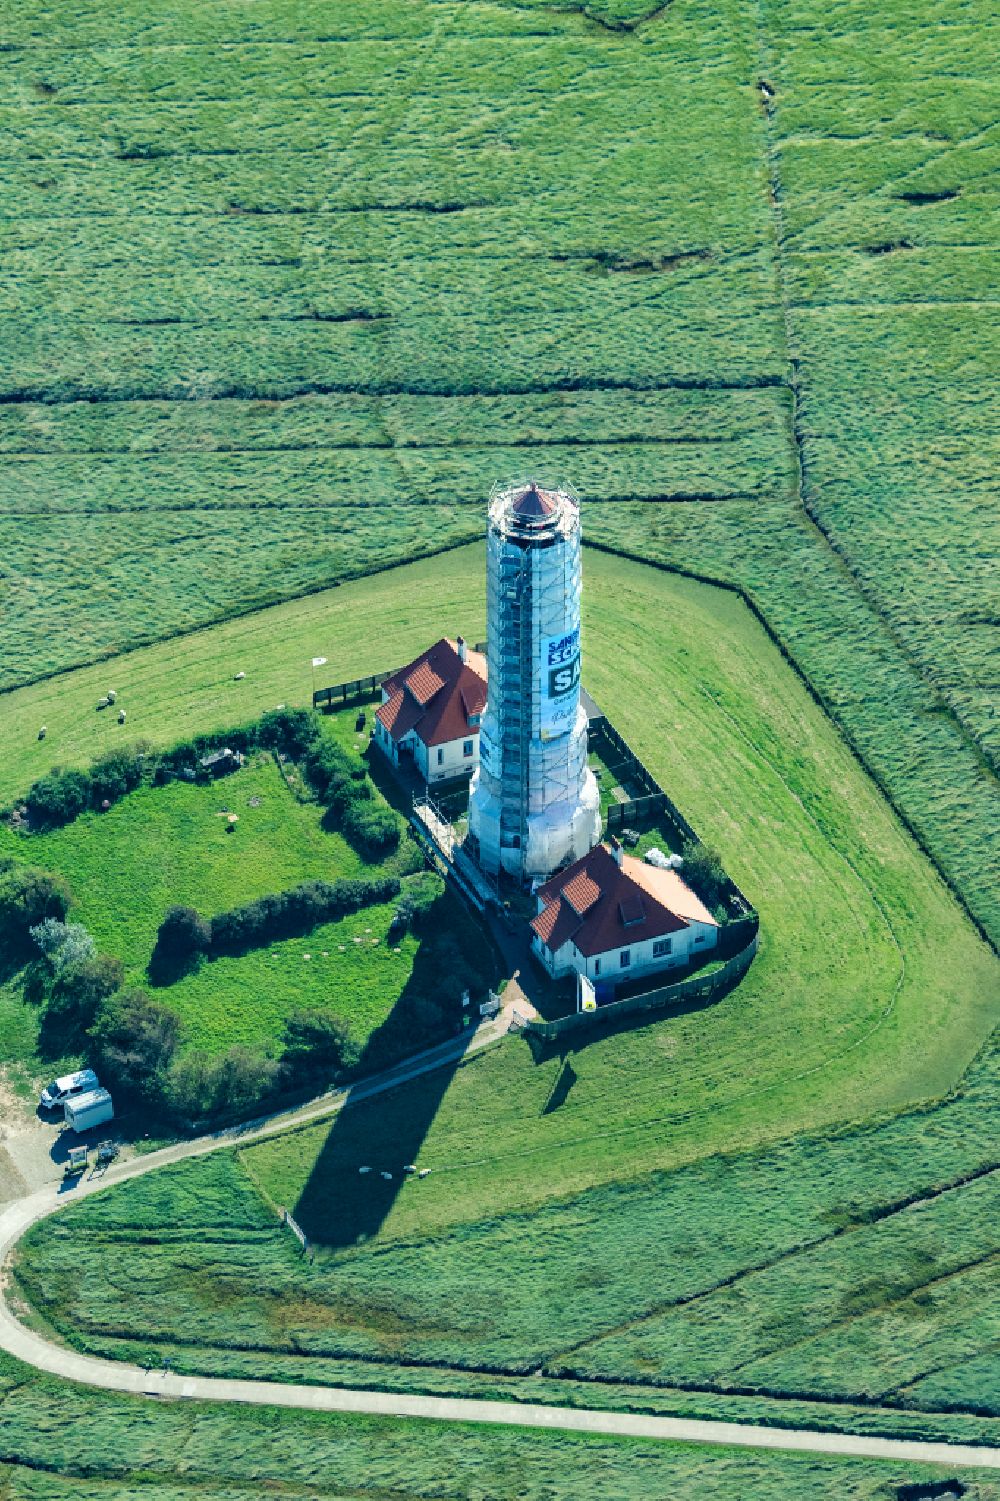 Westerhever from the bird's eye view: Sandblasting and renovation work on the Westerheversand lighthouse as a historical maritime symbol in the coastal area of the North Sea in Westerhever in the state of Schleswig-Holstein